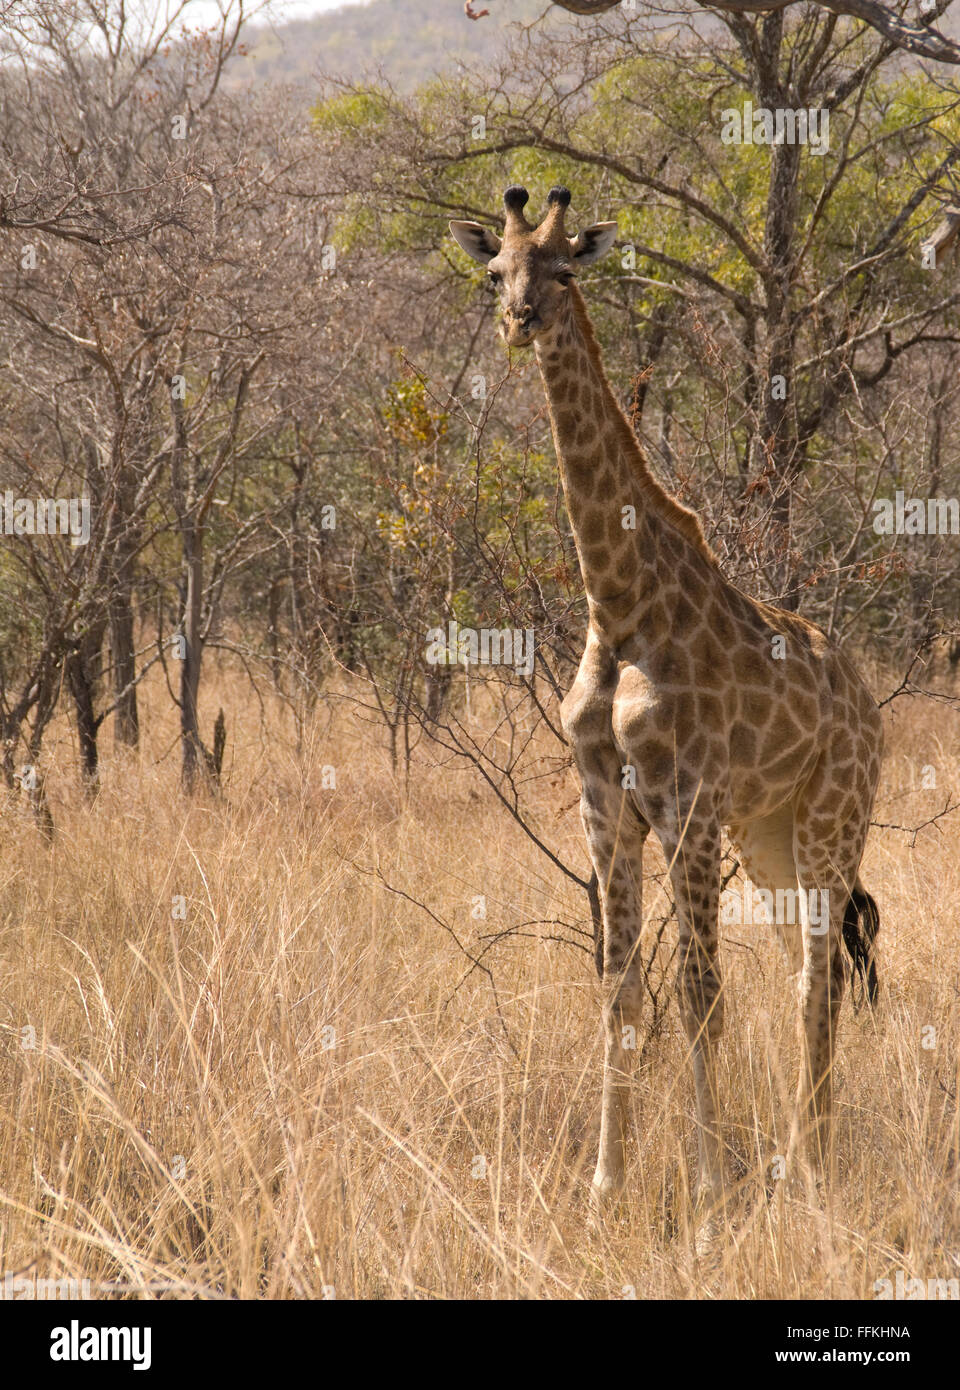 Giraffes conservation status is least concern Stock Photo